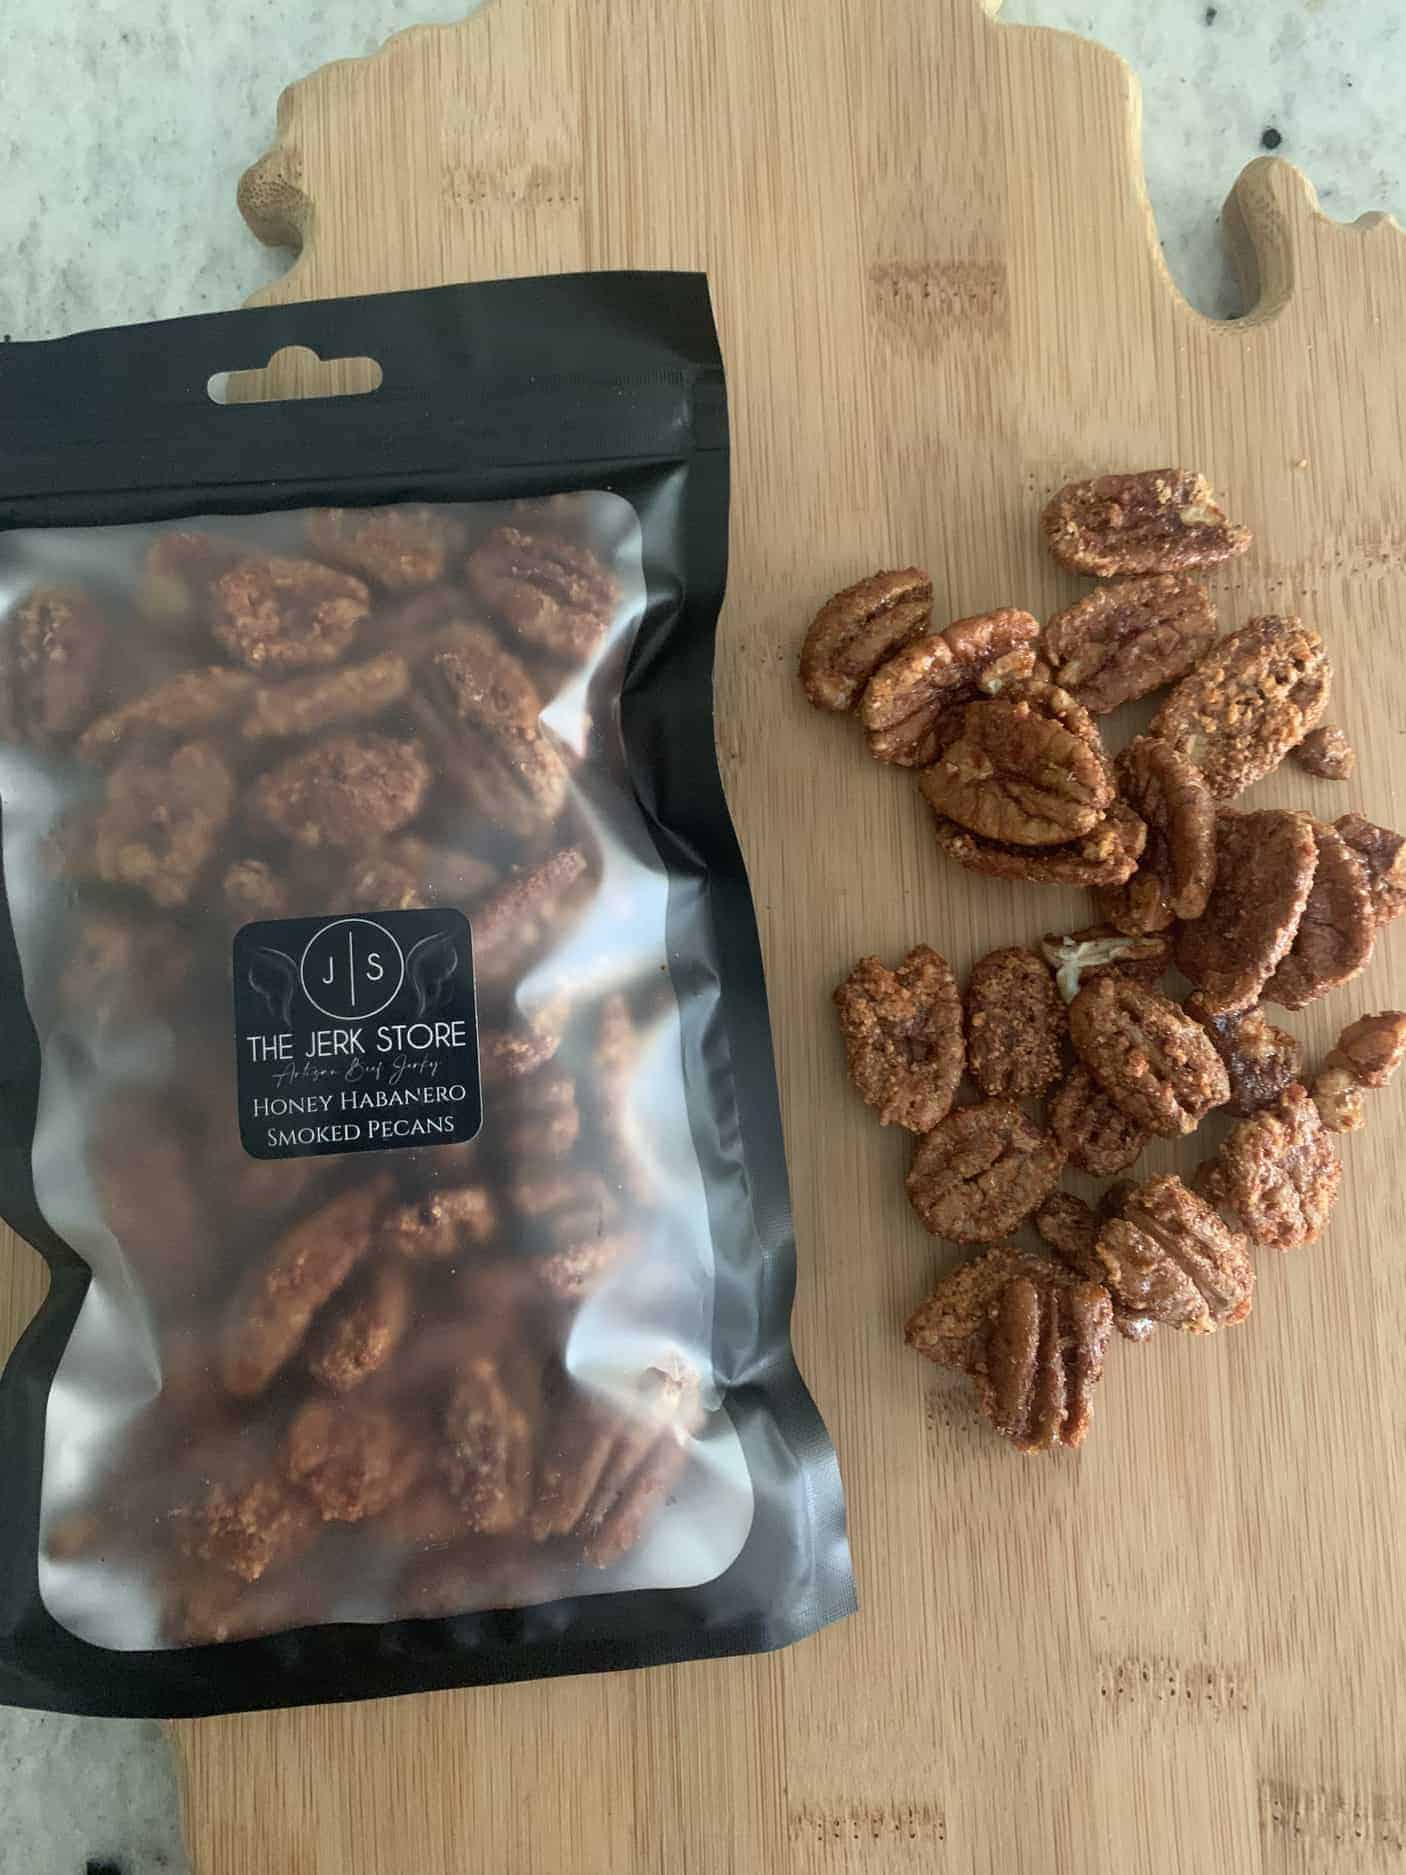 This Honey Habanero Glazed Pecans is made with love by The Jerk Store! Shop more unique gift ideas today with Spots Initiatives, the best way to support creators.